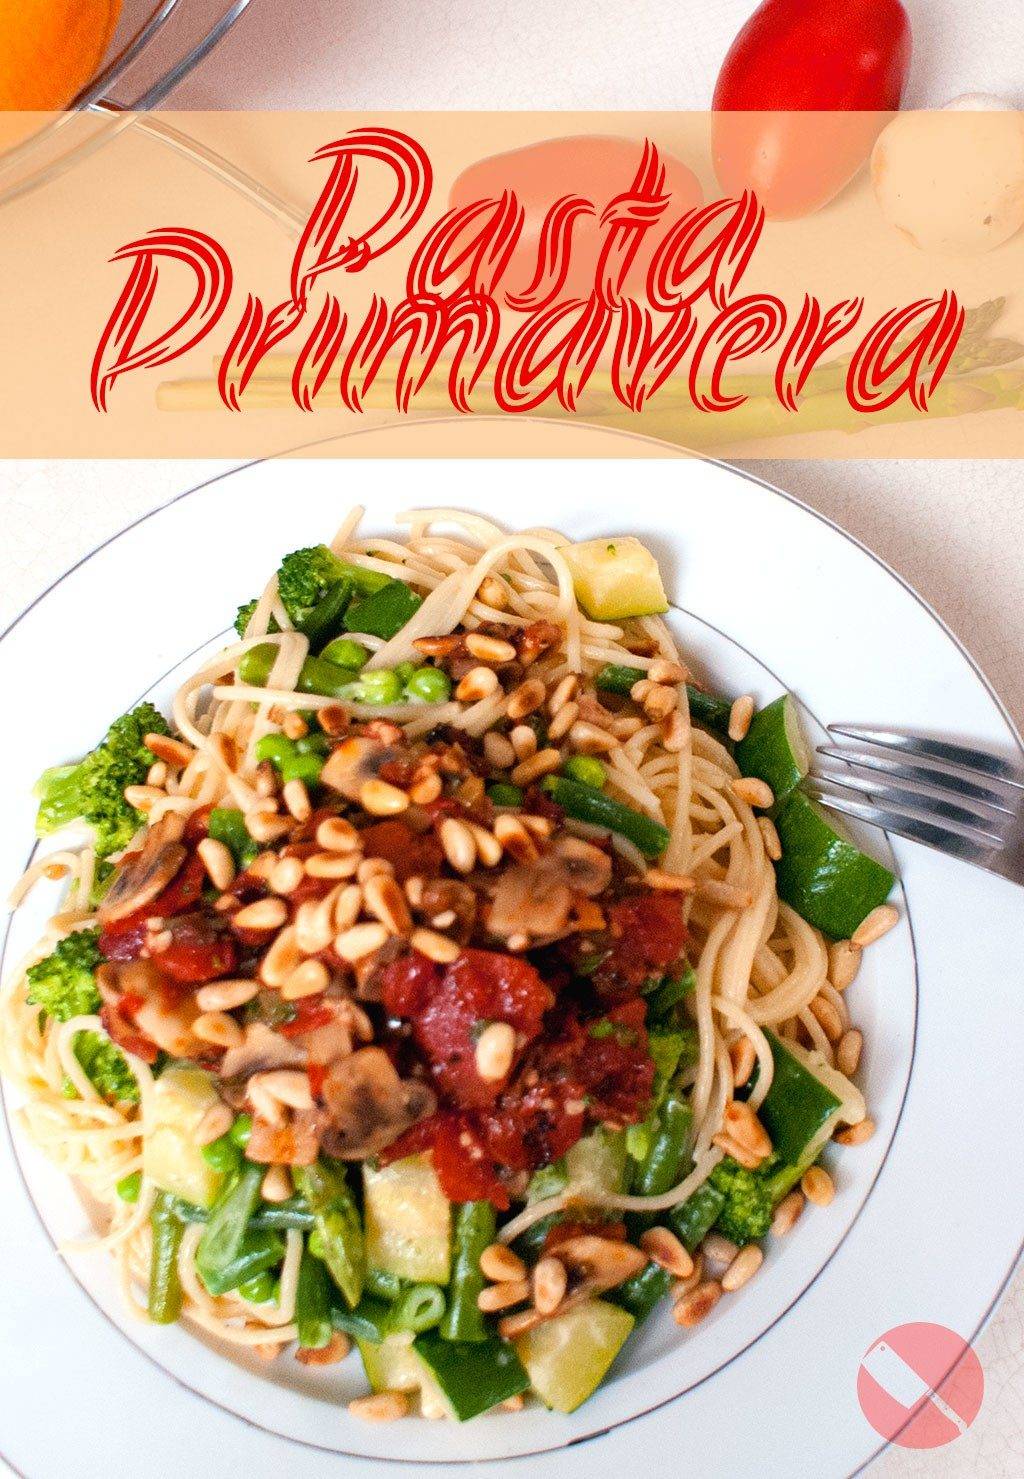 Pasta Primavera. As American as Baseball and Apple Pie, but with a lovely Italian flare